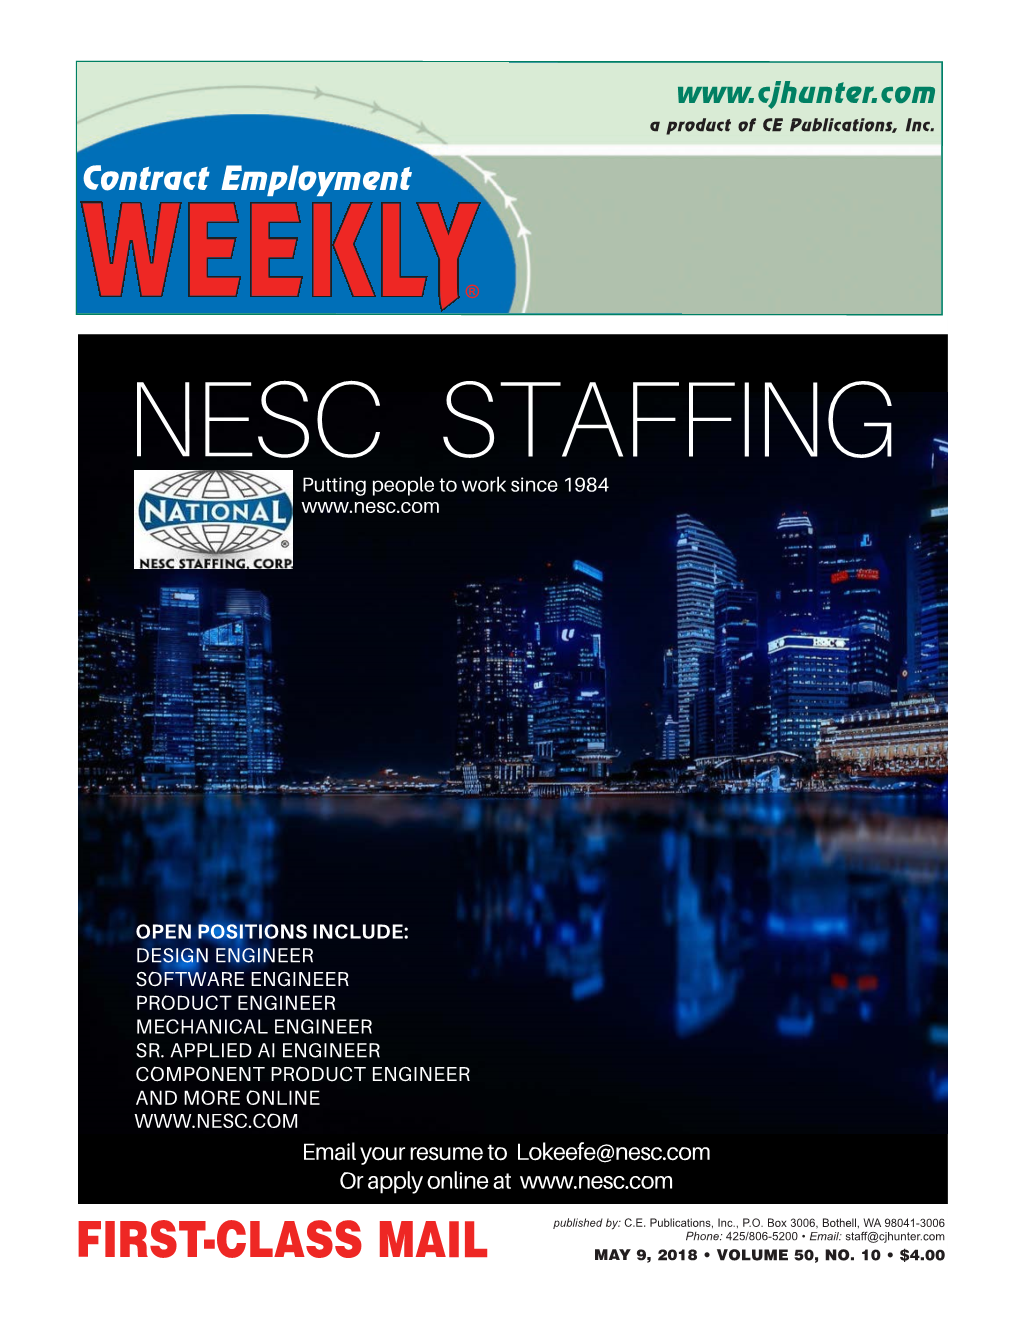 NESC STAFFING Putting People to Work Since 1984